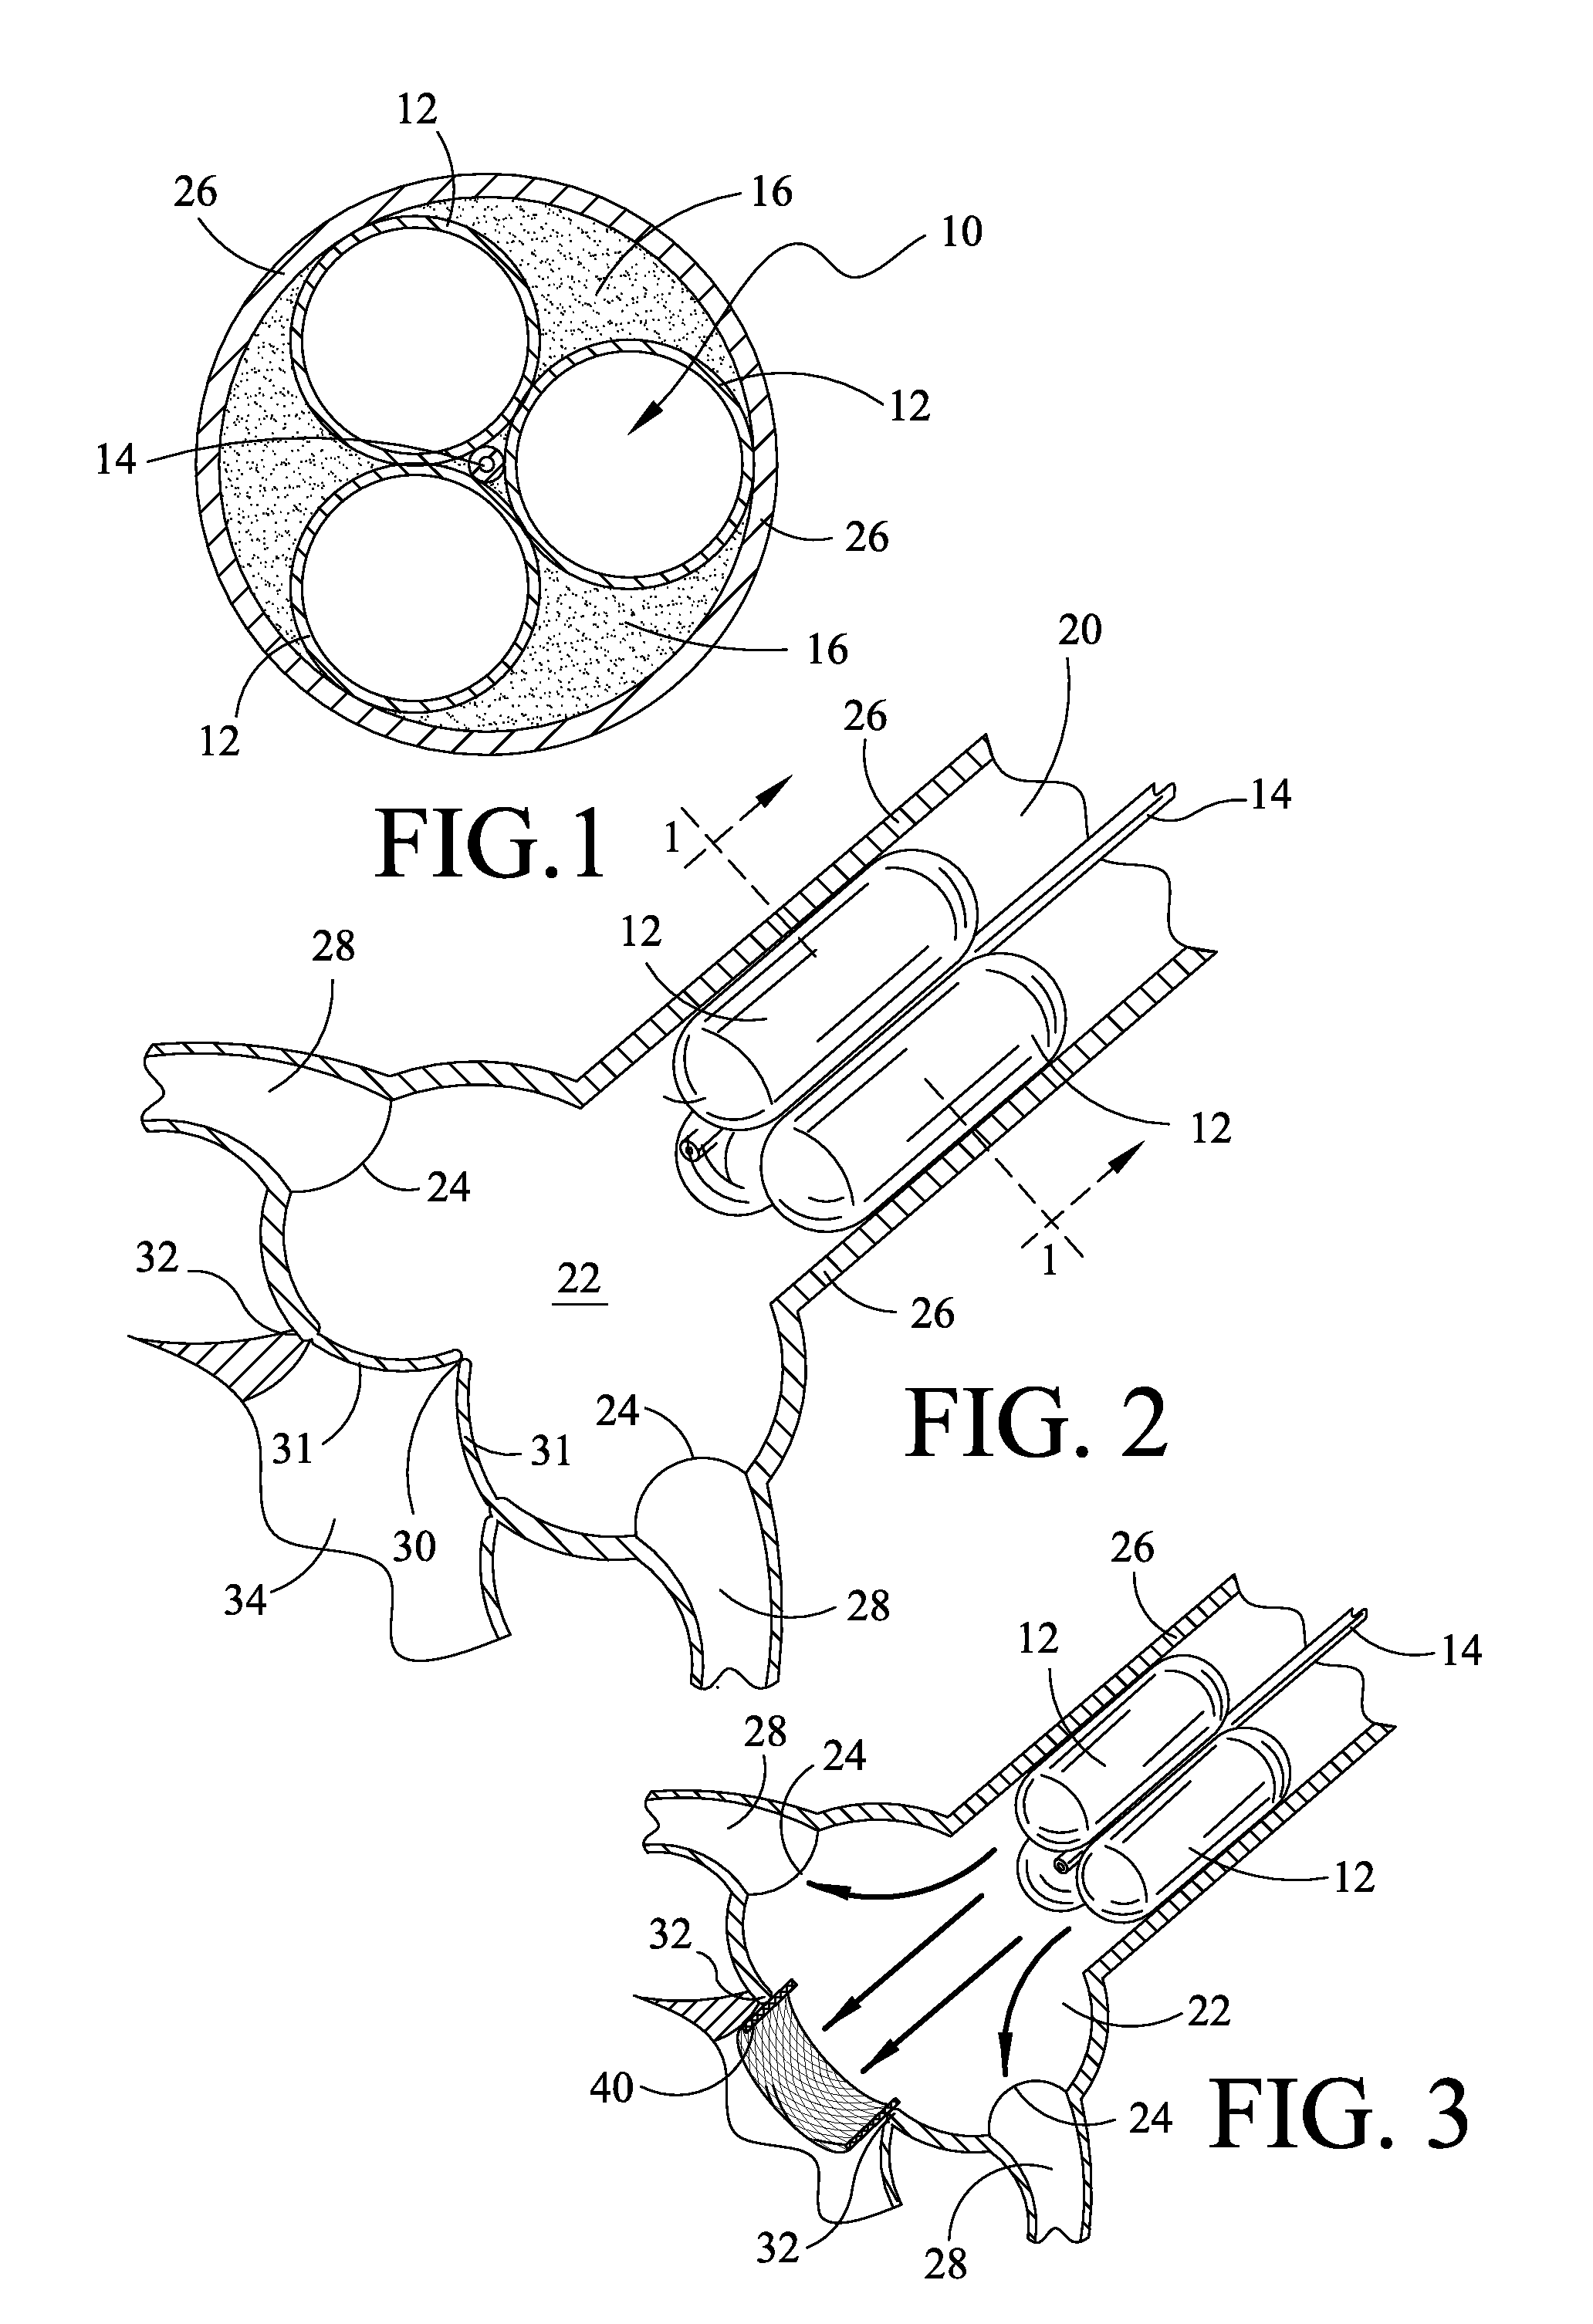 Method and apparatus for percutaneous aortic valve replacement